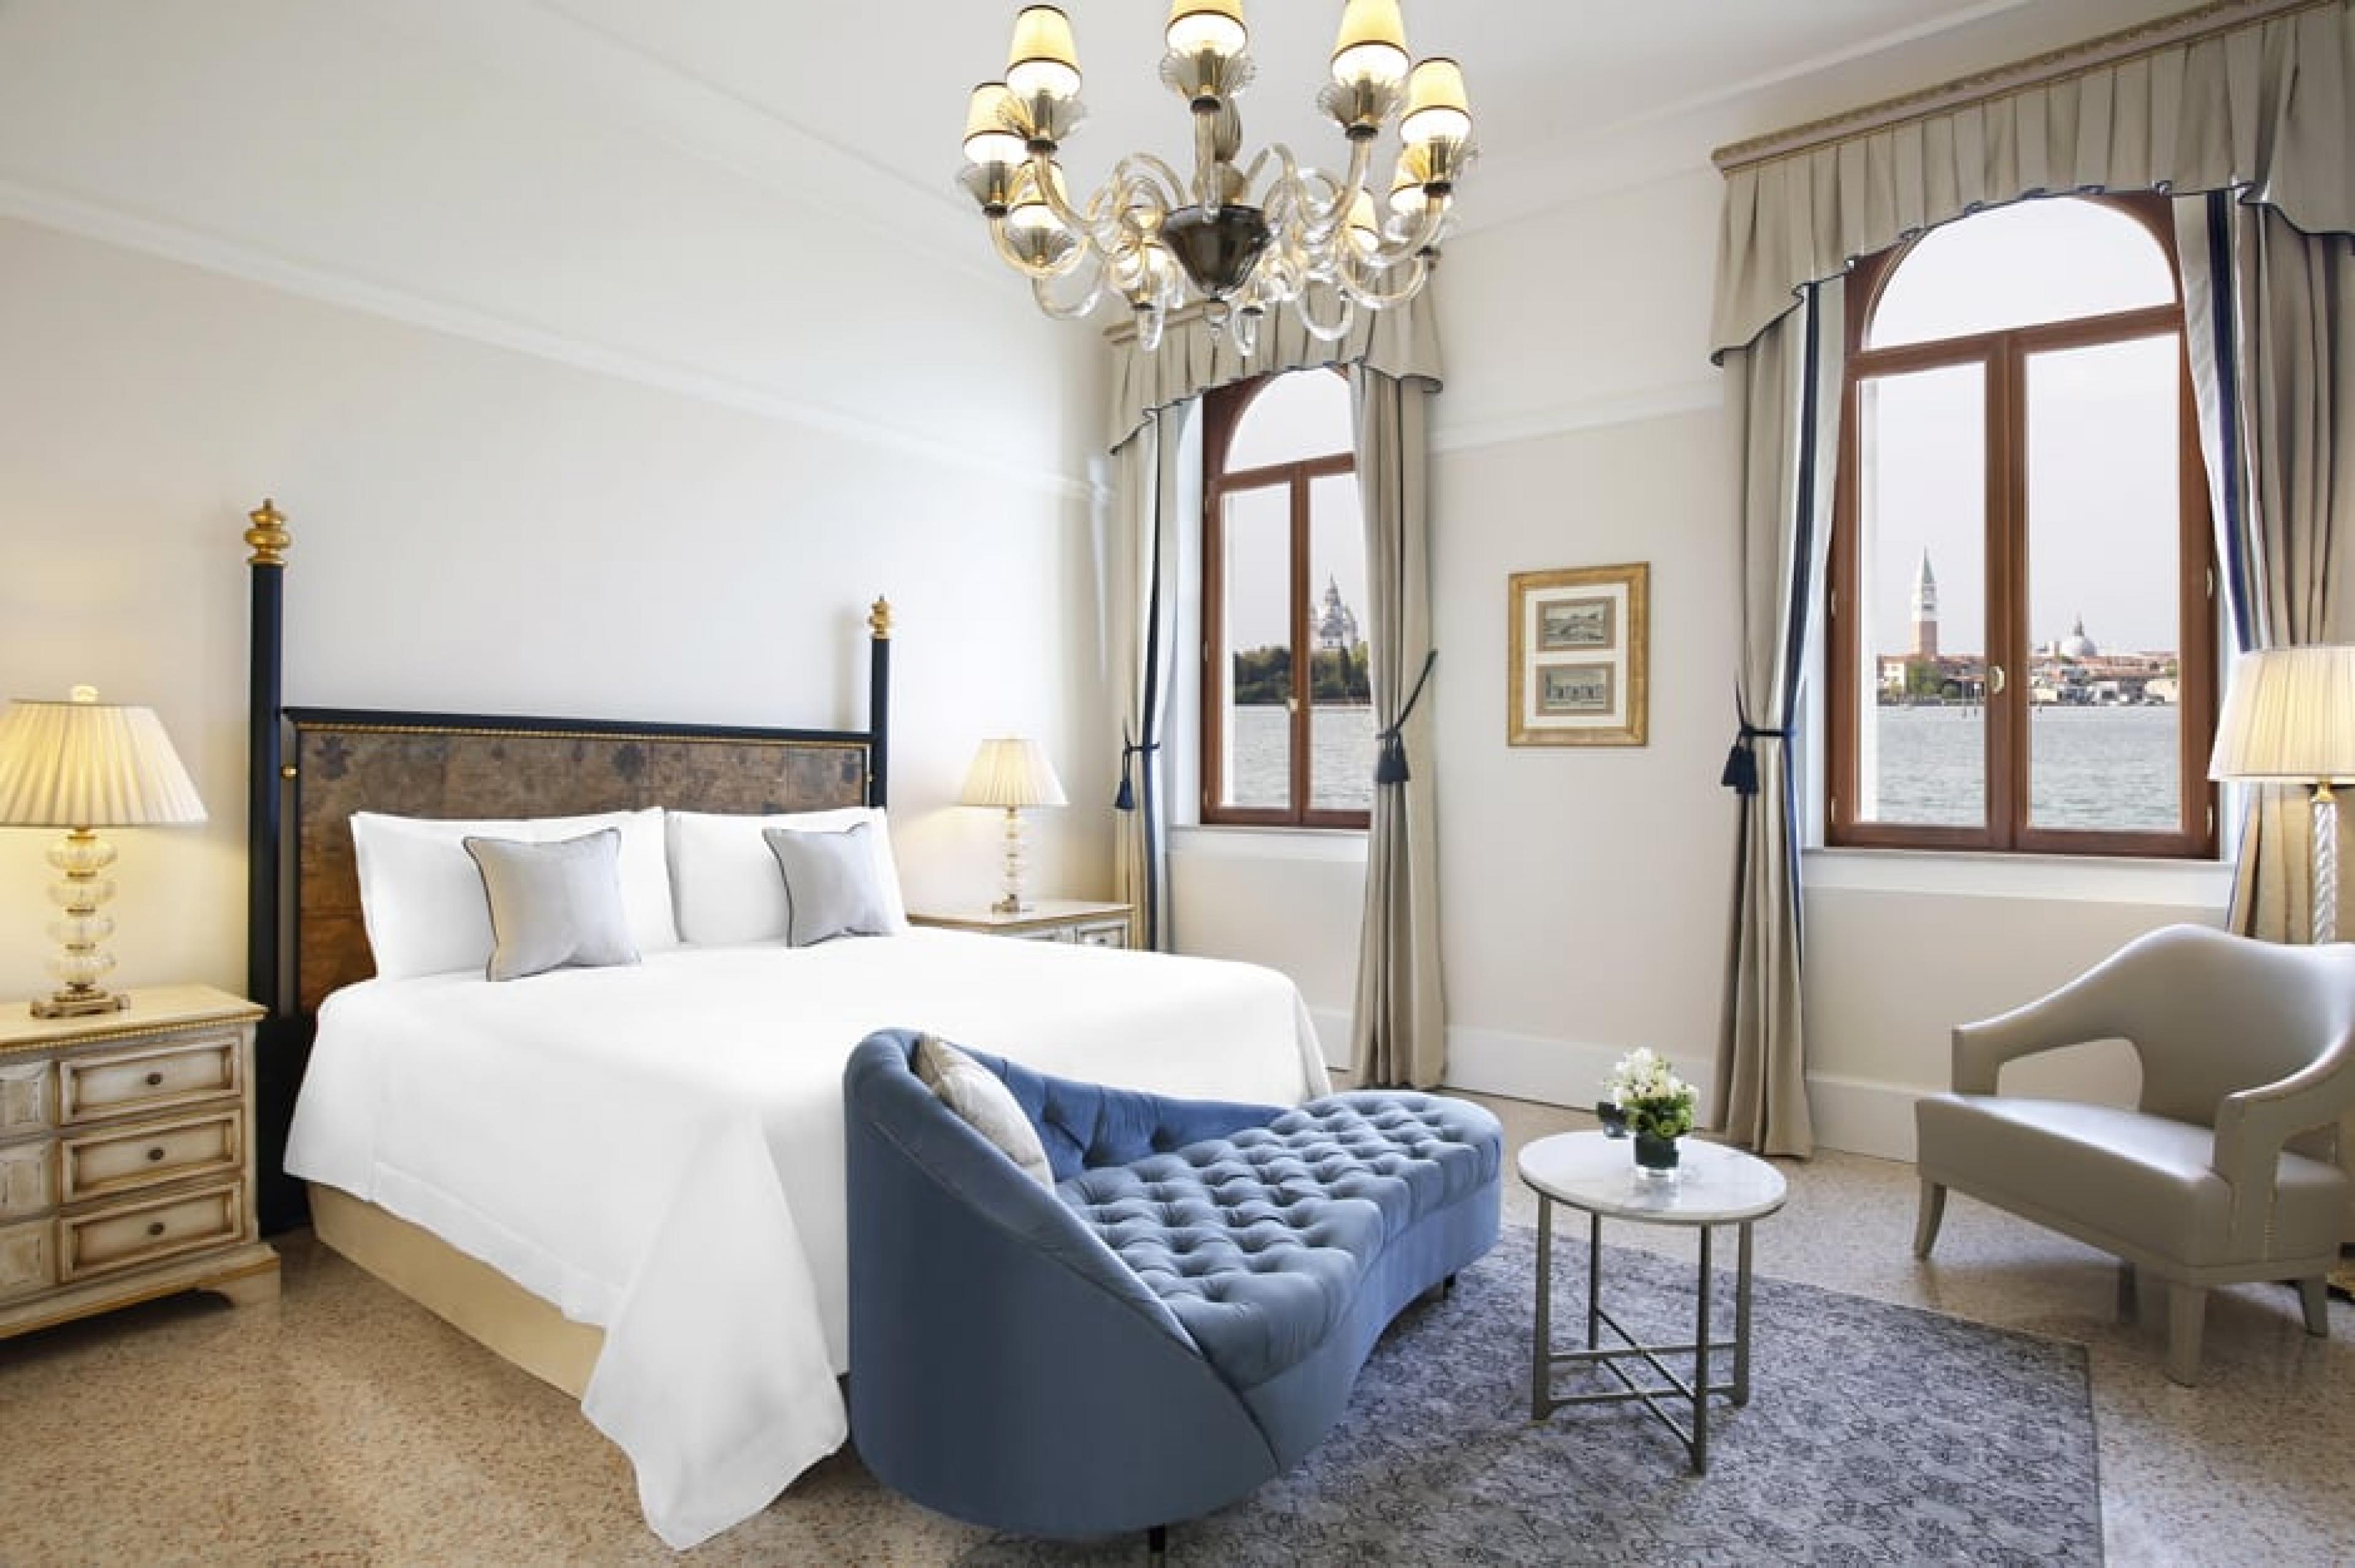 Suite at San Clemente Palace Kempinski, Venice, Italy